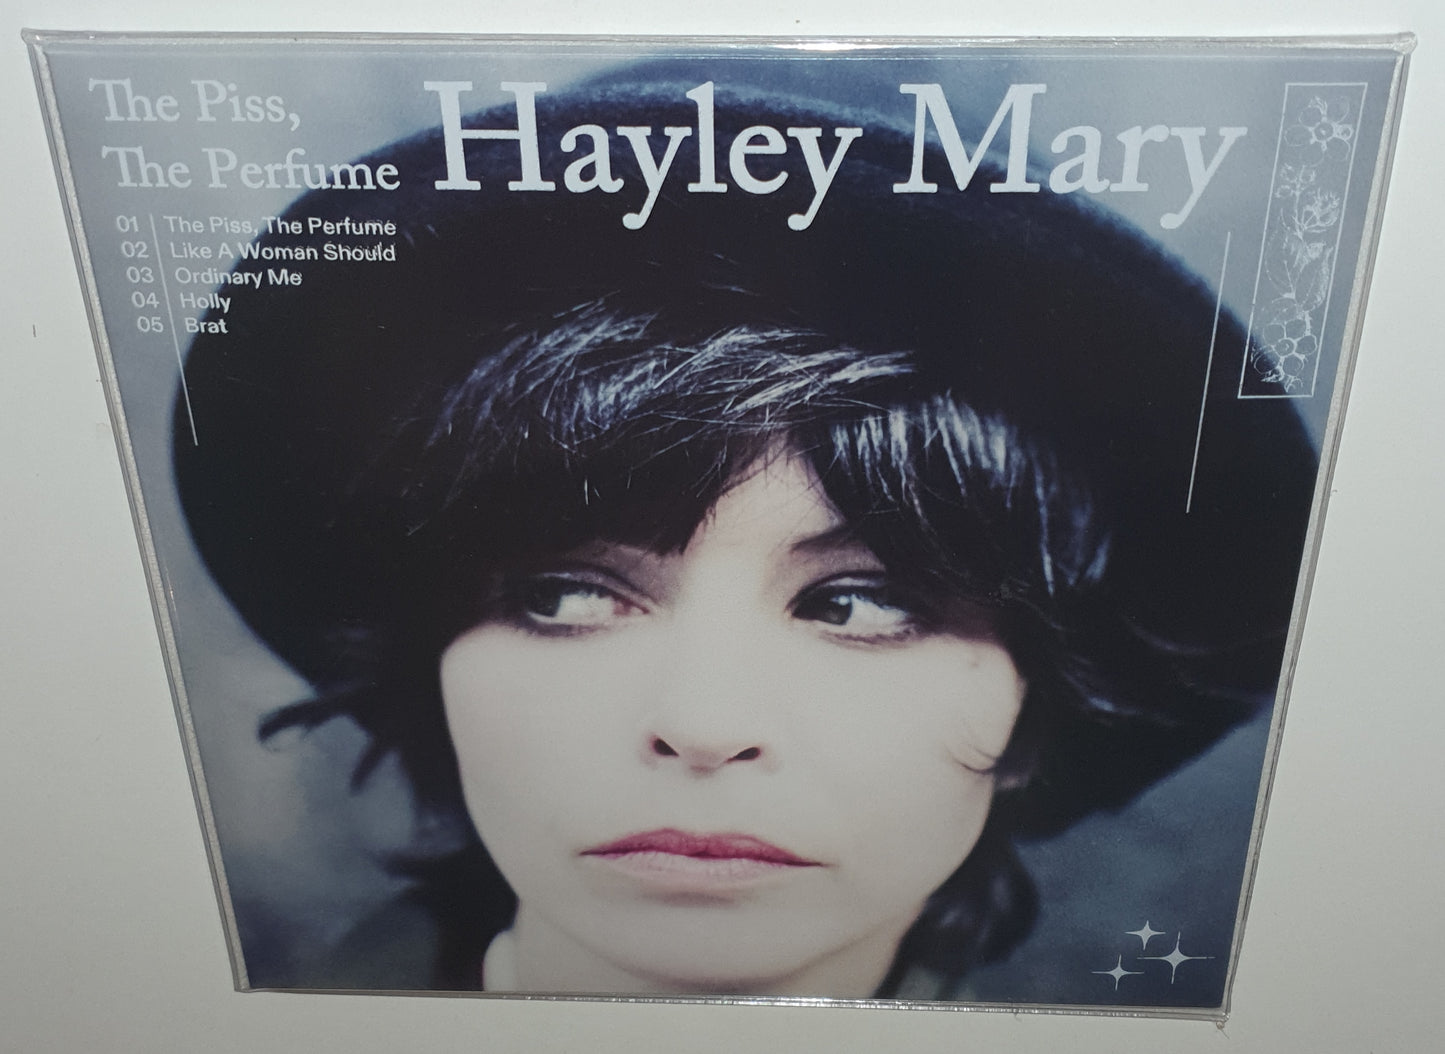 Hayley Mary - The Piss, The Perfume (2020) (Limited Edition 10" Vinyl EP)